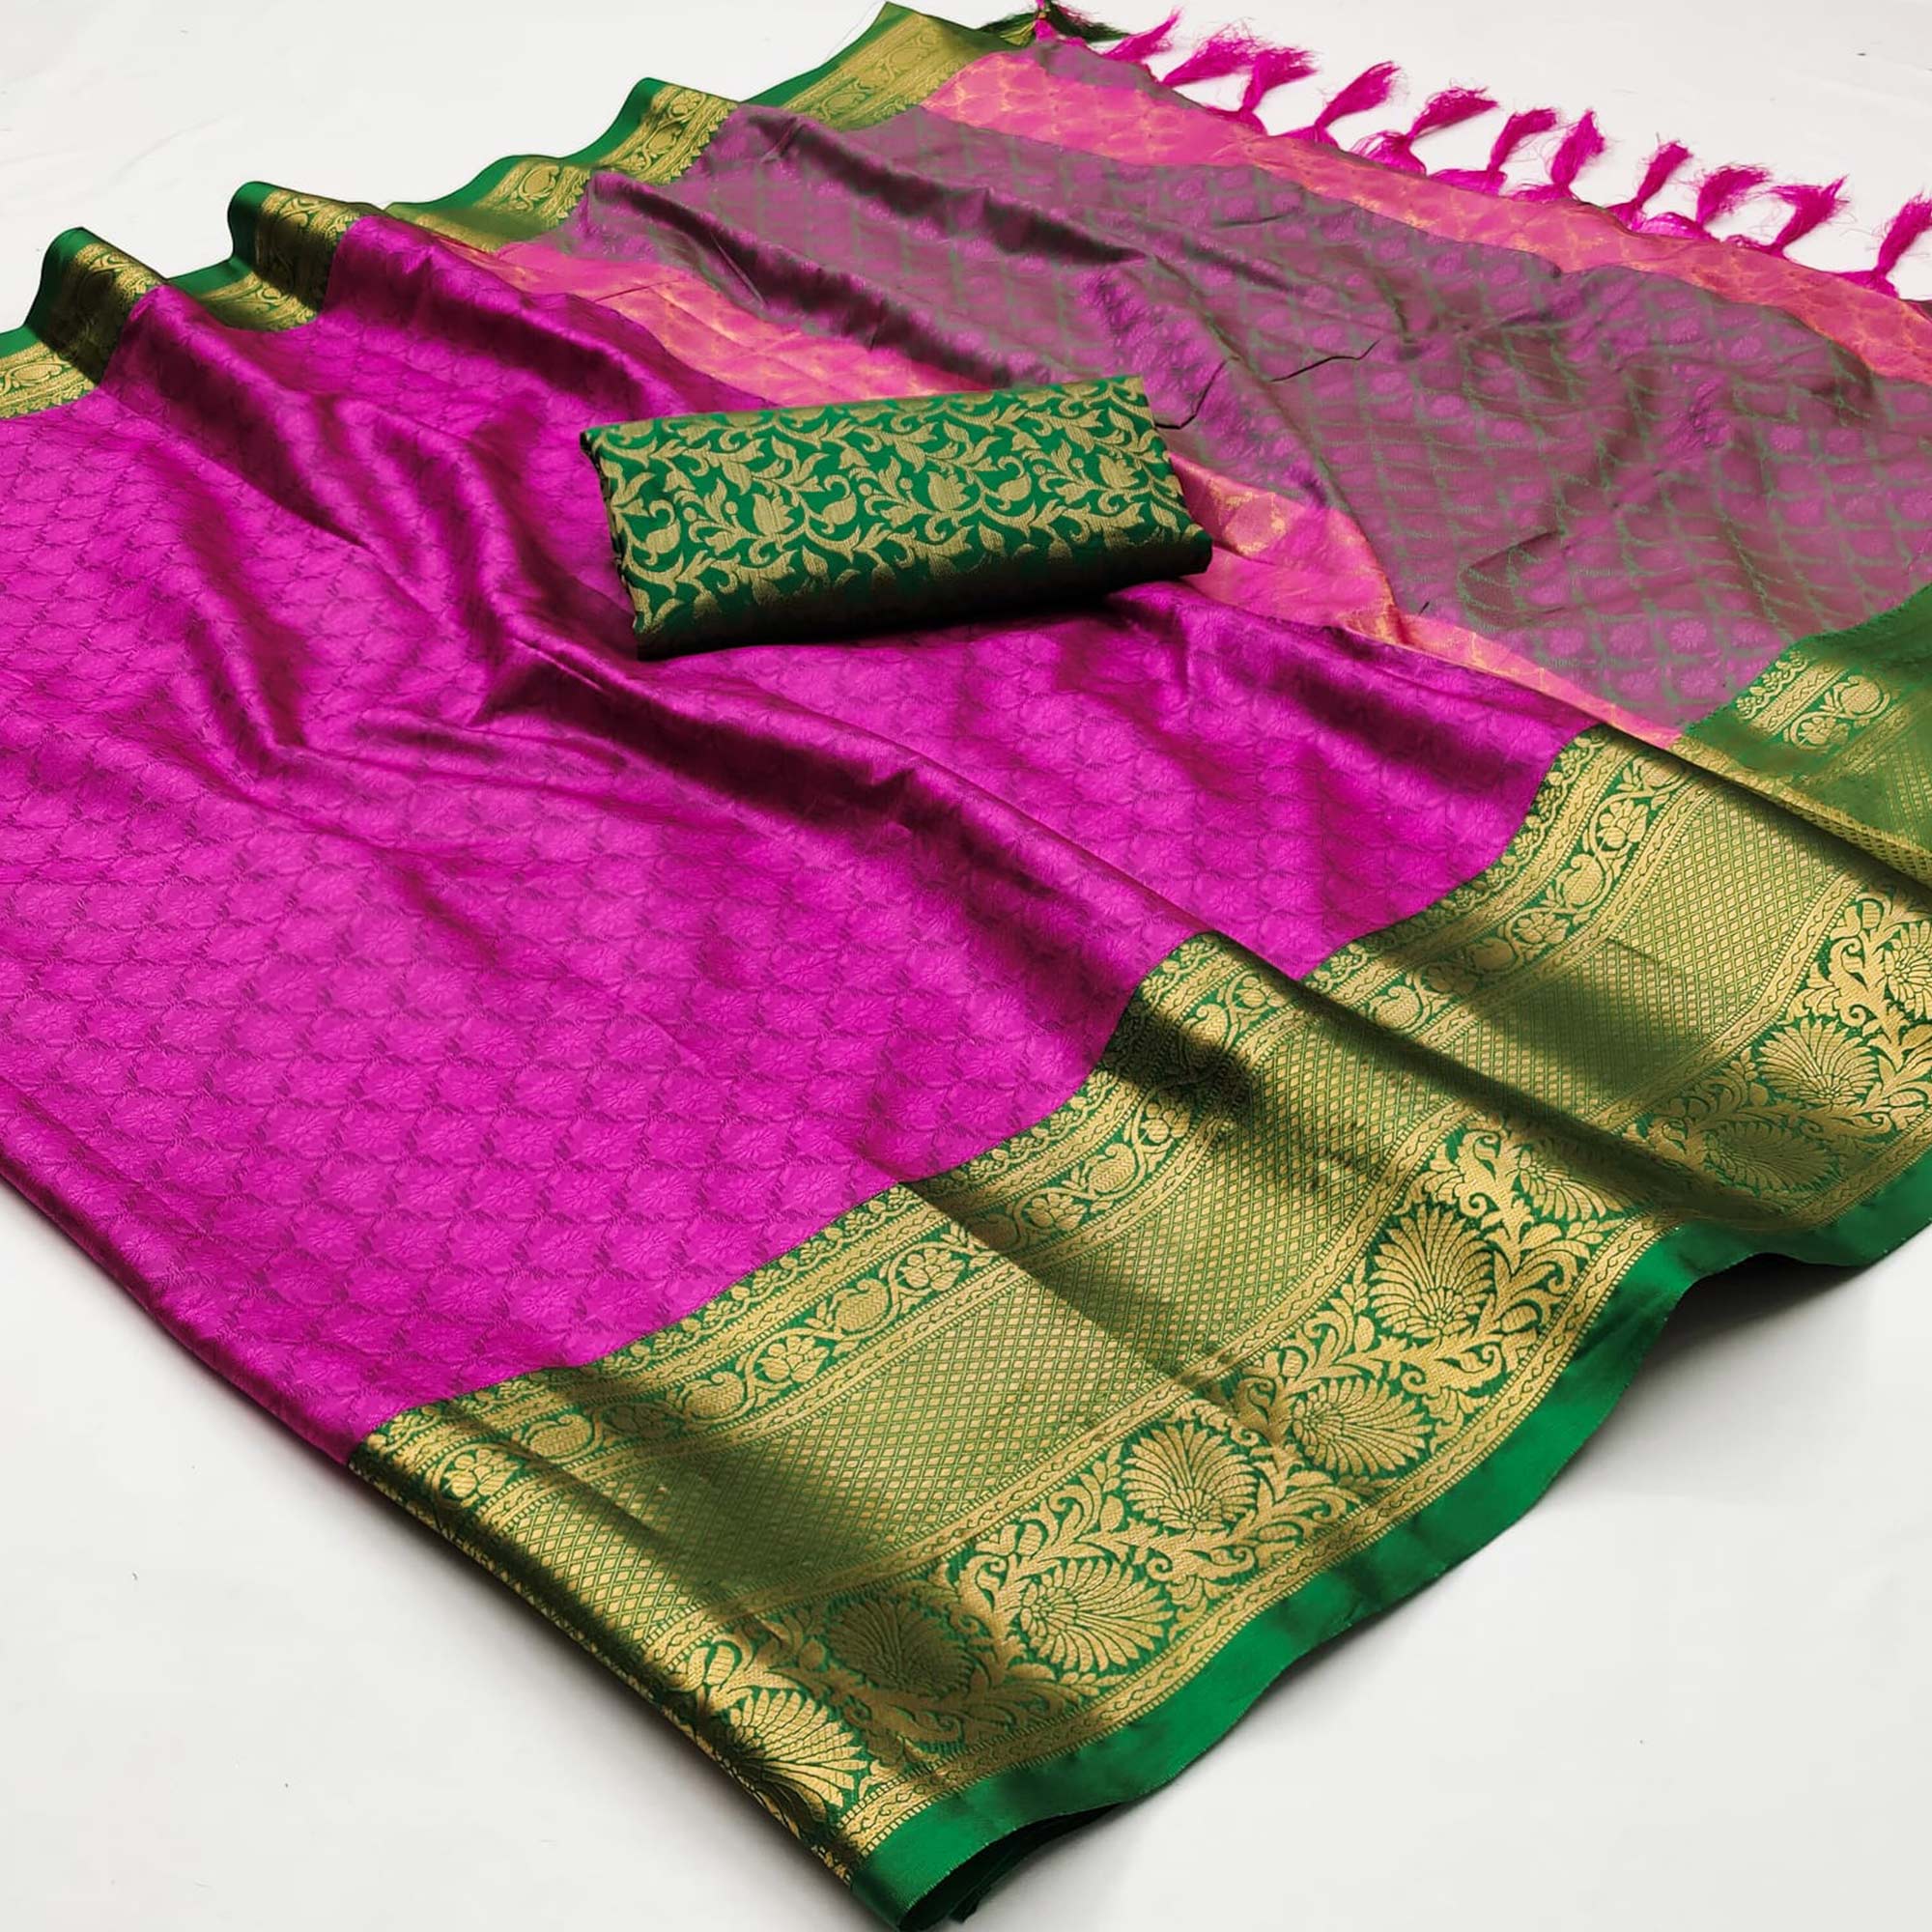 Rani Pink Printed And Woven Cotton Silk Saree With Tassels